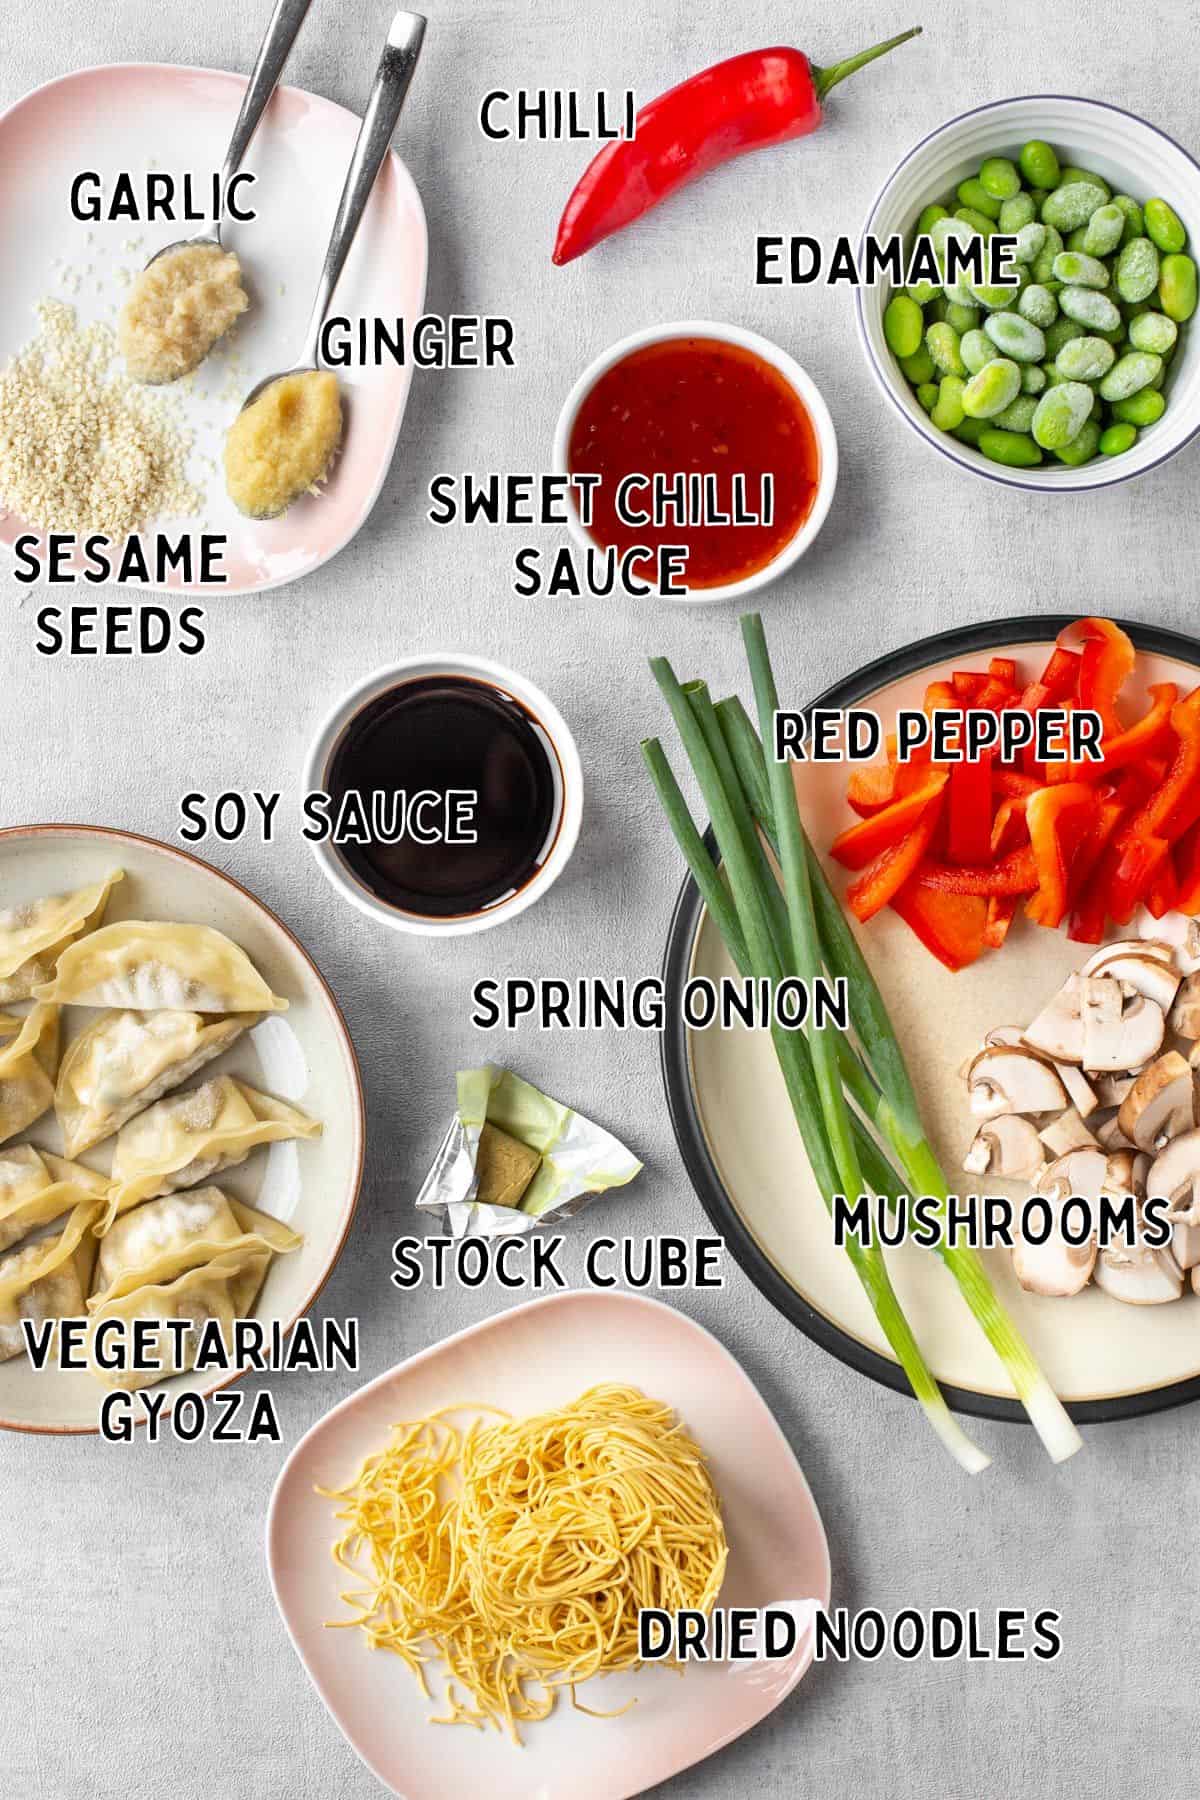 Ingredients for vegetarian gyoza soup with text overlay.